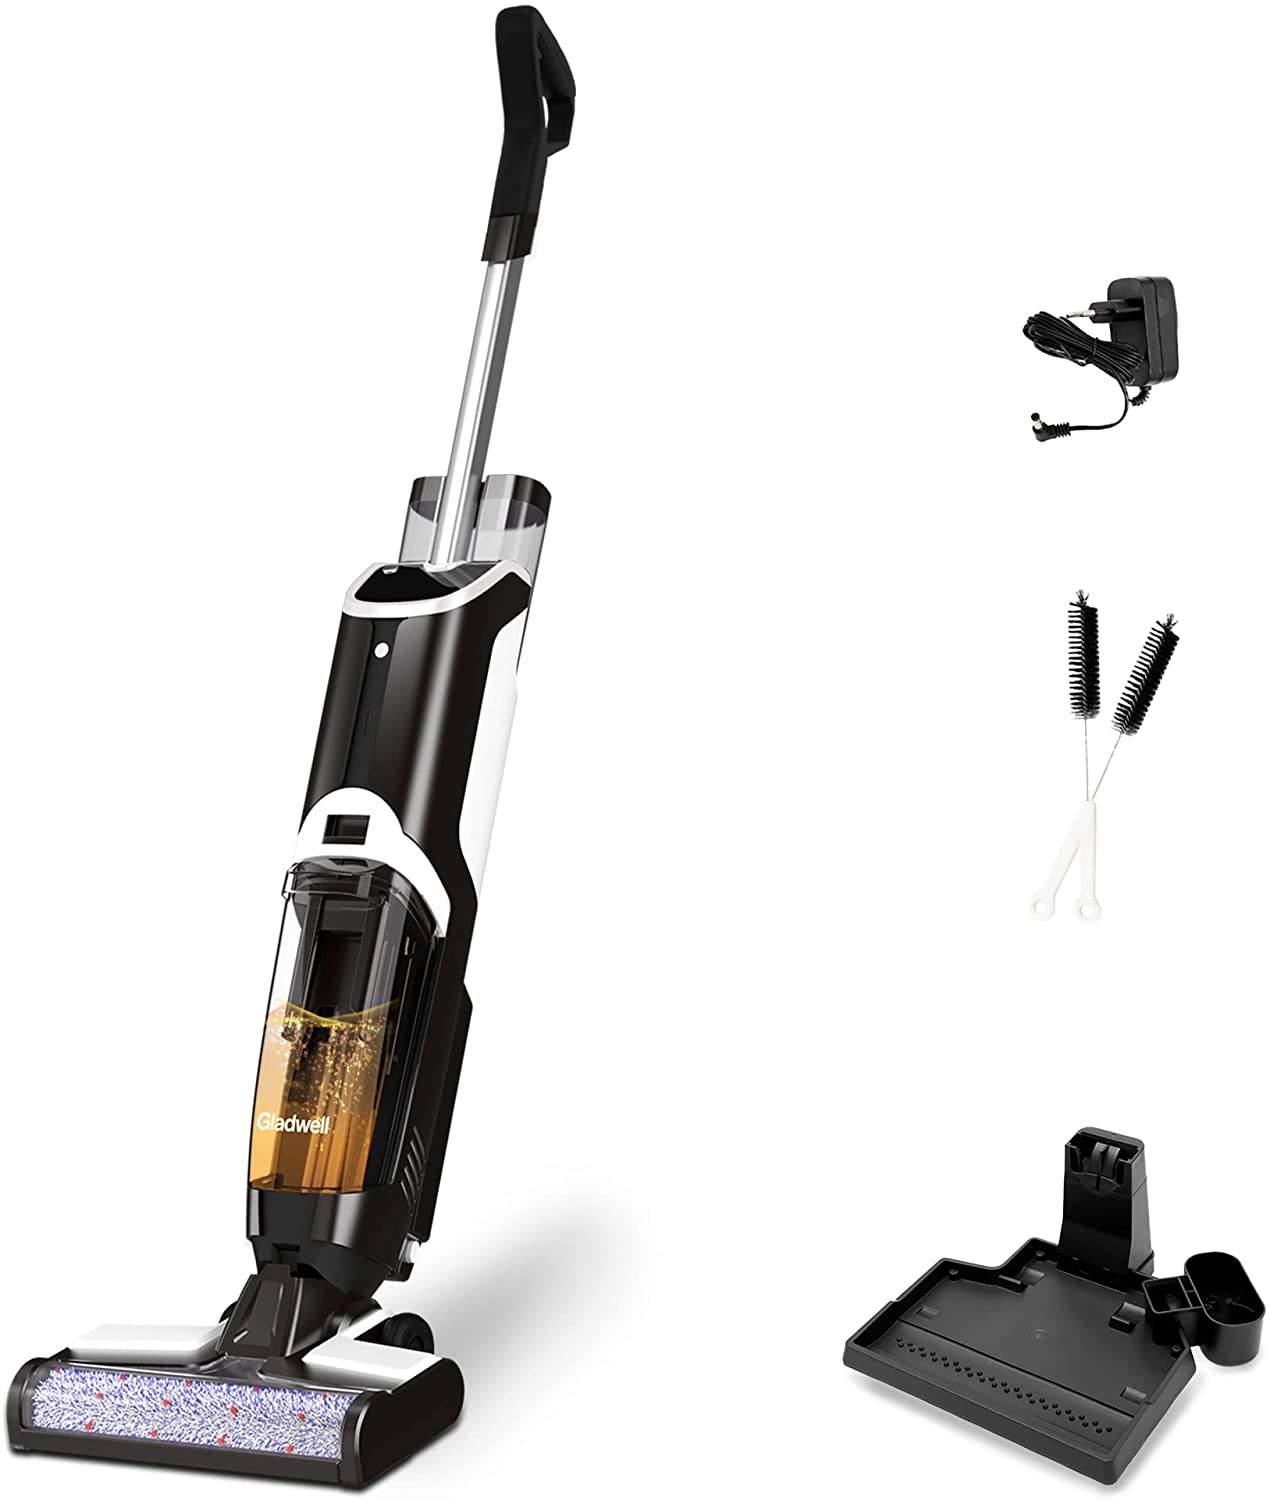 Gladwell Cordless Electric Mop - 3 in 1 Spinner, Scrubber and Waxer